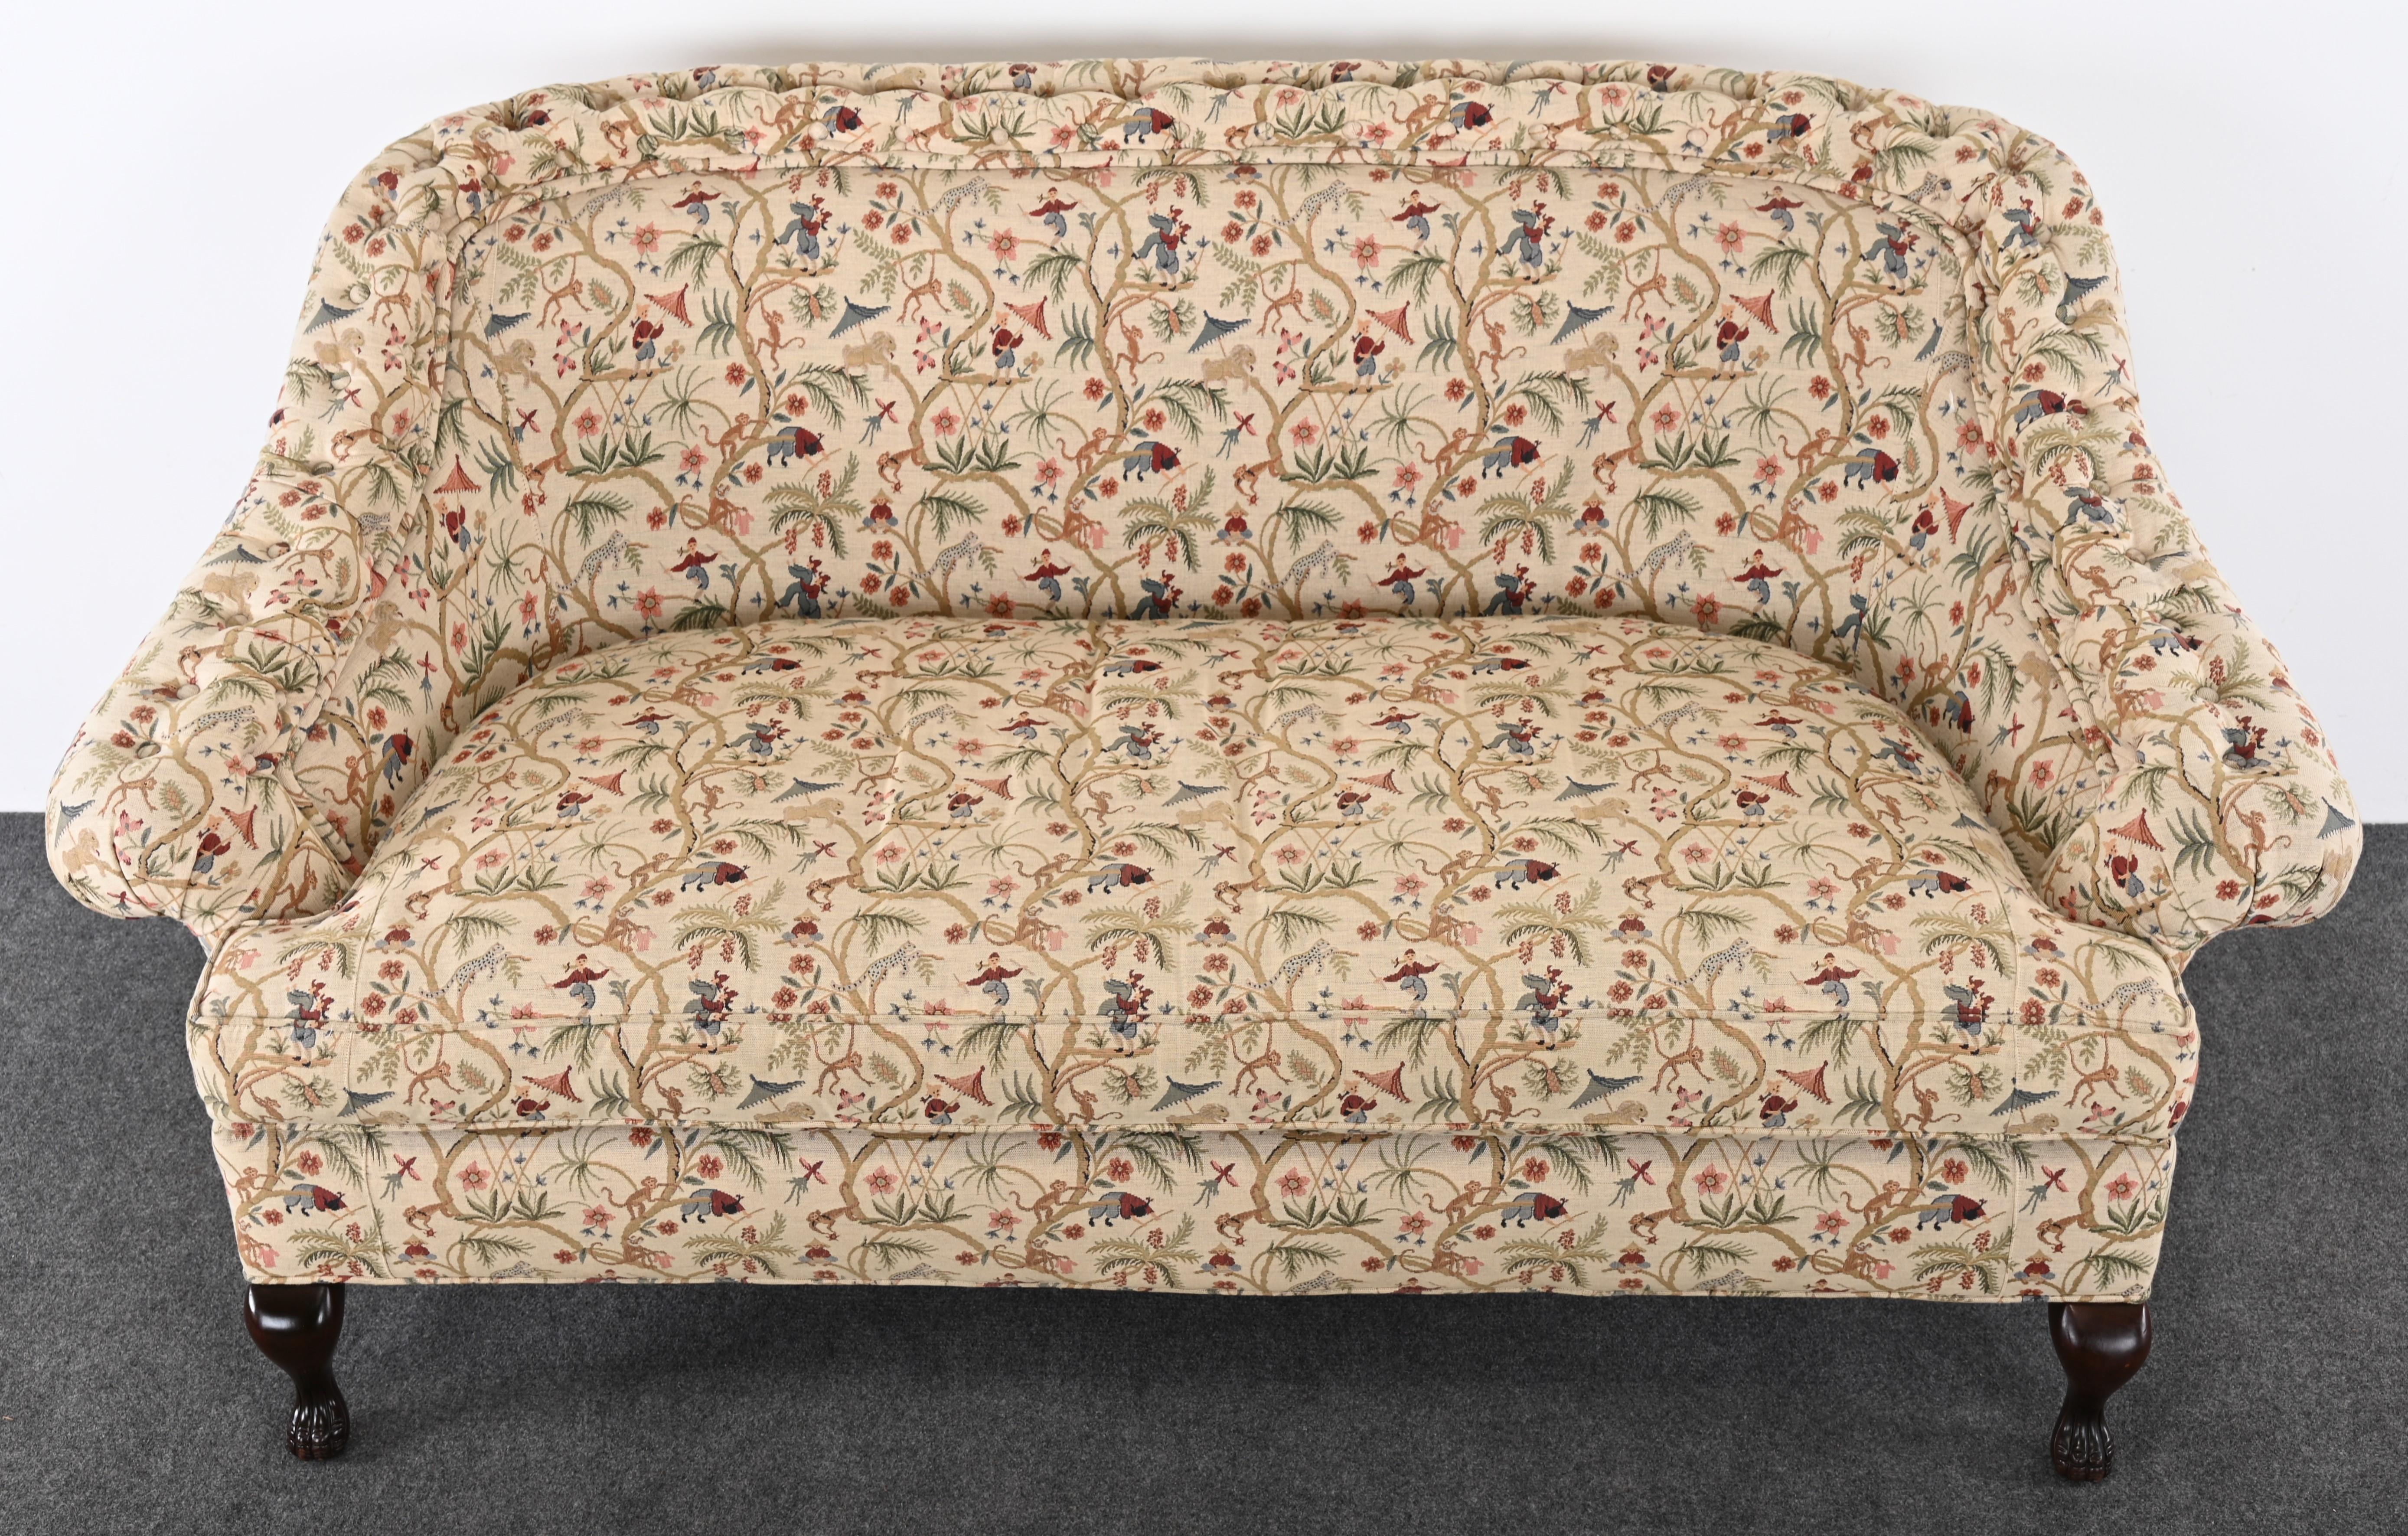 Upholstery Knight's Bridge Sofa for Harrods Fine Furniture Collection, 20th Century